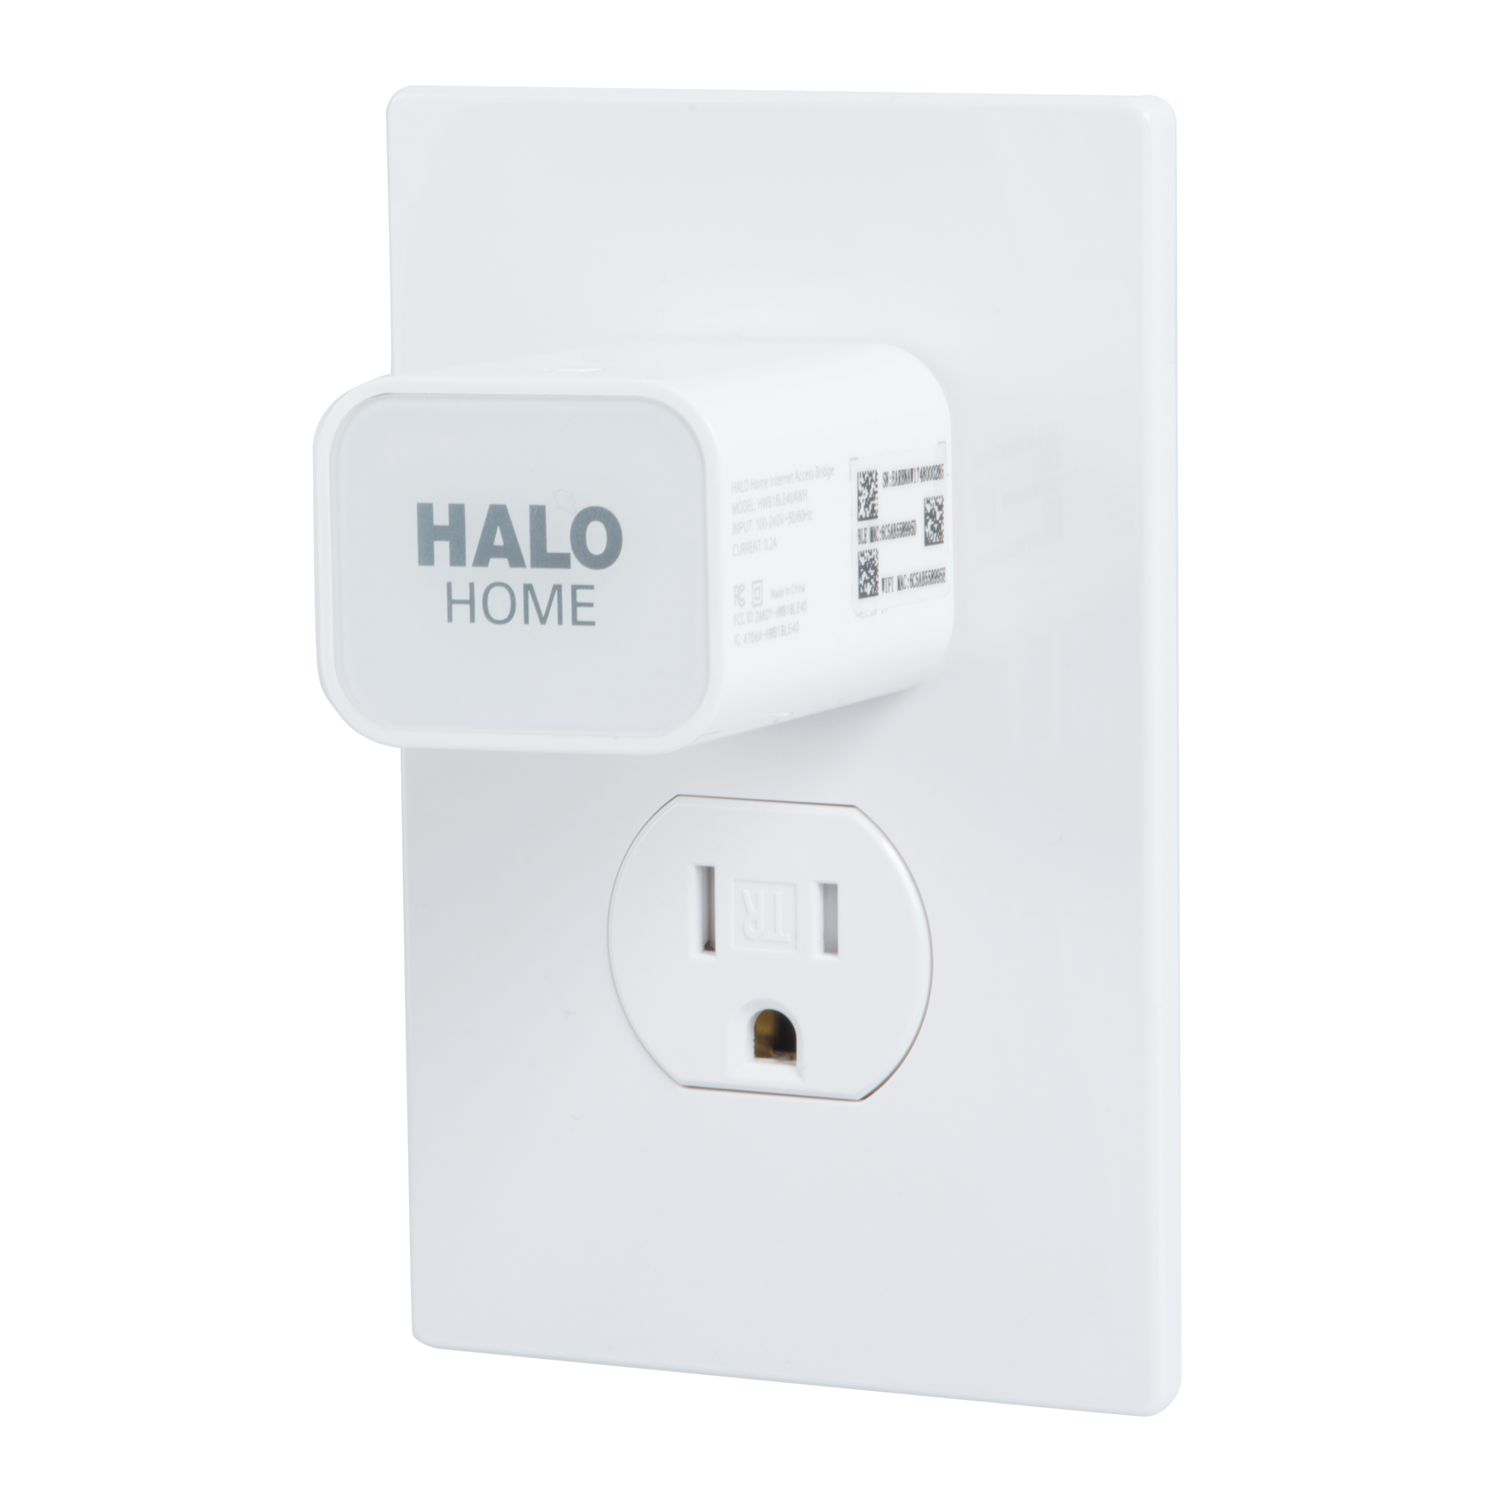 Halo Home White Bluetooth Enabled 4.0 Smart Internet Access Bridge 2 lot of 